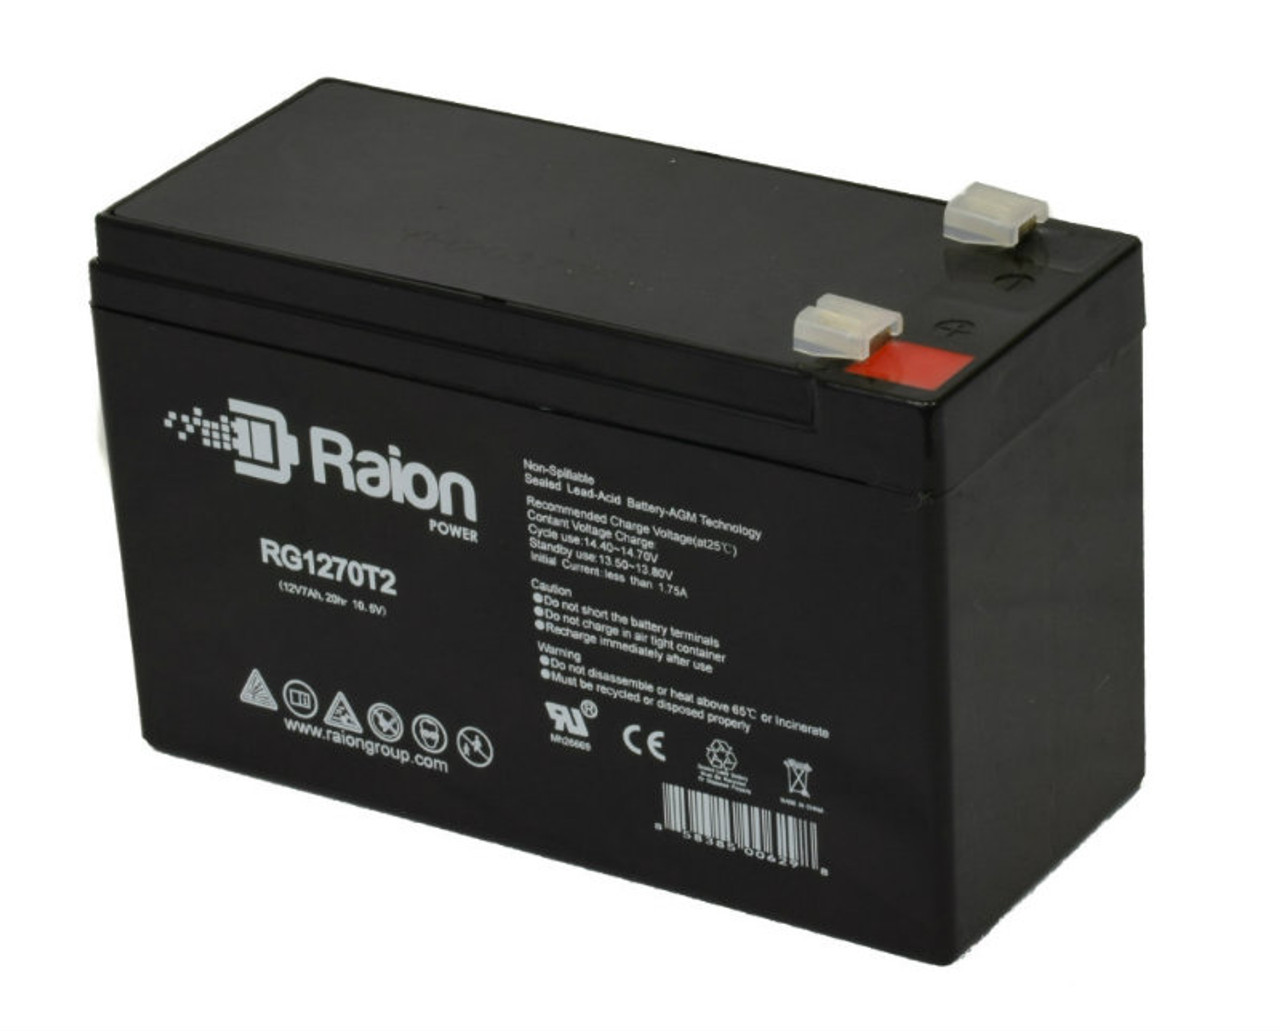 Raion Power Replacement 12V 7Ah Emergency Light Battery for National Power GT026P4 - 1 Pack